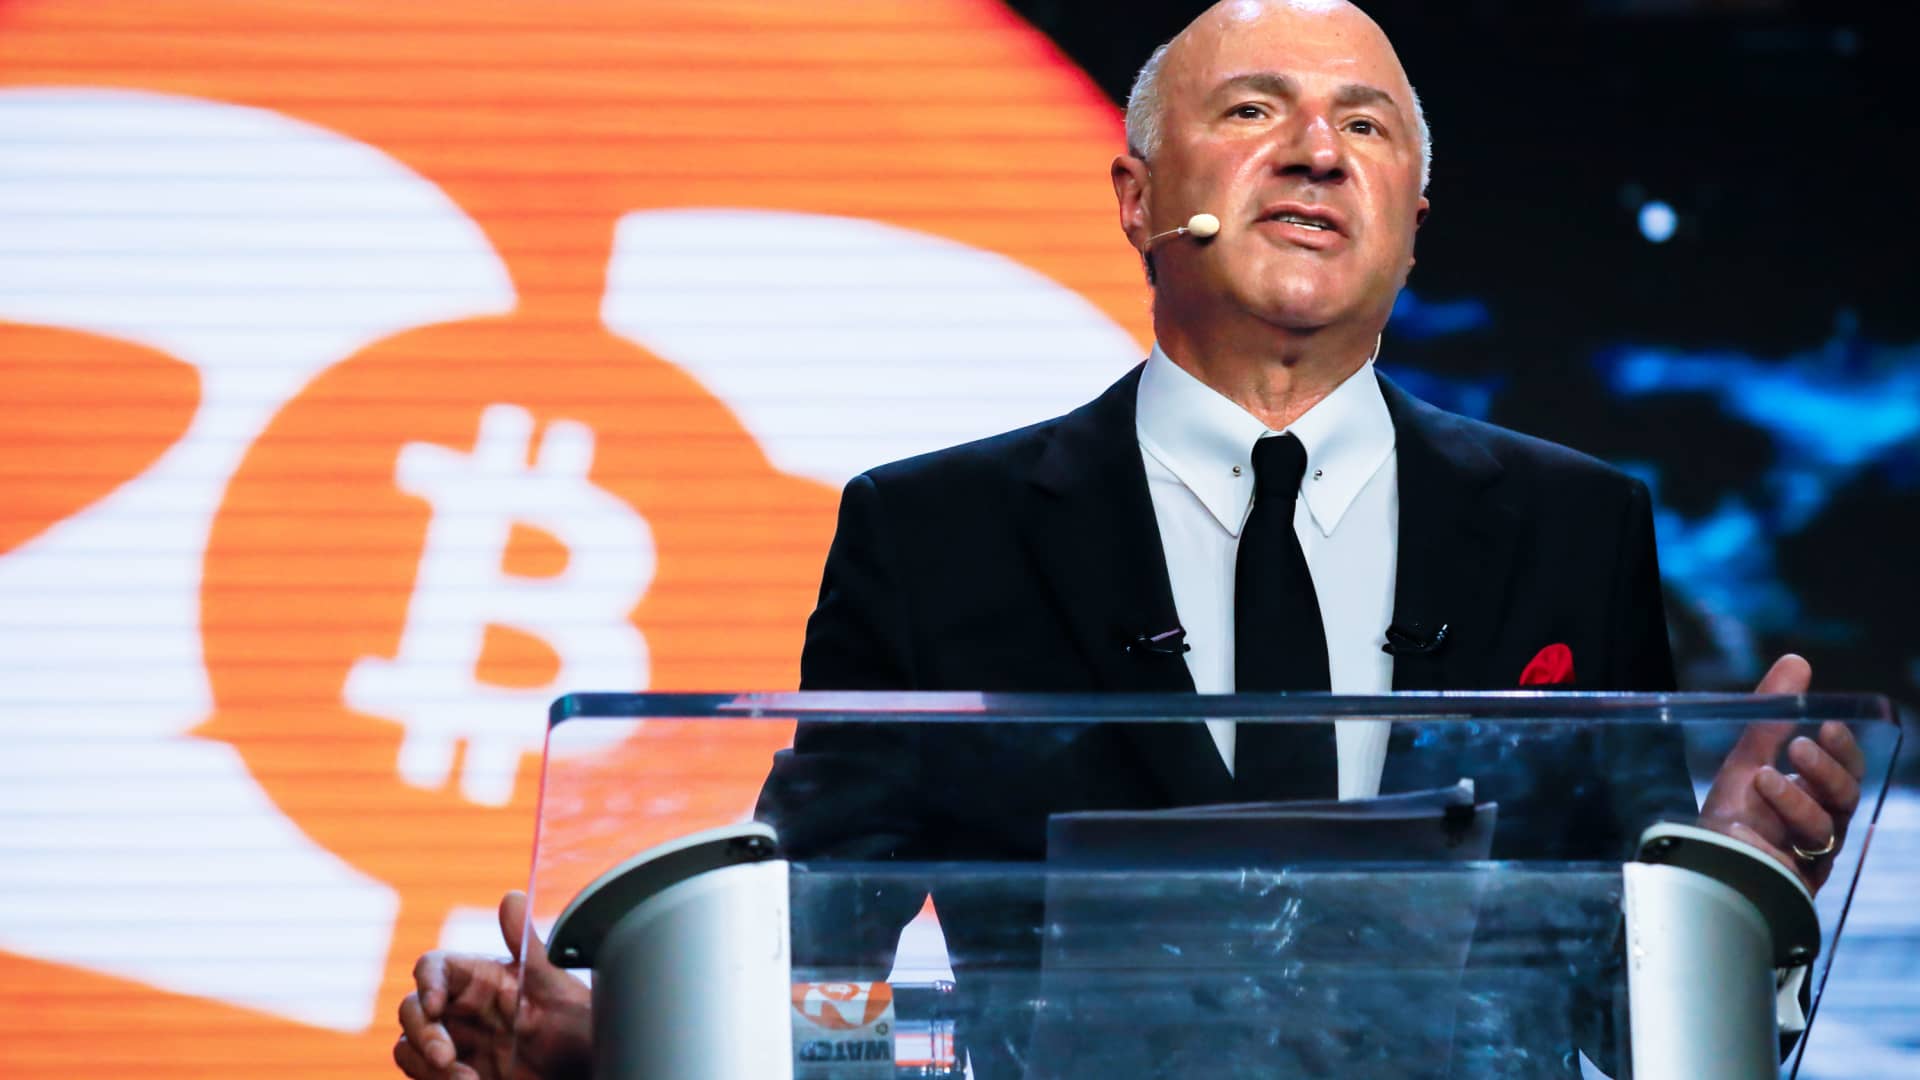 Kevin O'Leary, chairman of O'shares ETFs for O'Leary Funds Management LP, speaks during the Bitcoin 2022 conference in Miami, Florida, U.S., on Wednesday, April 6, 2022.